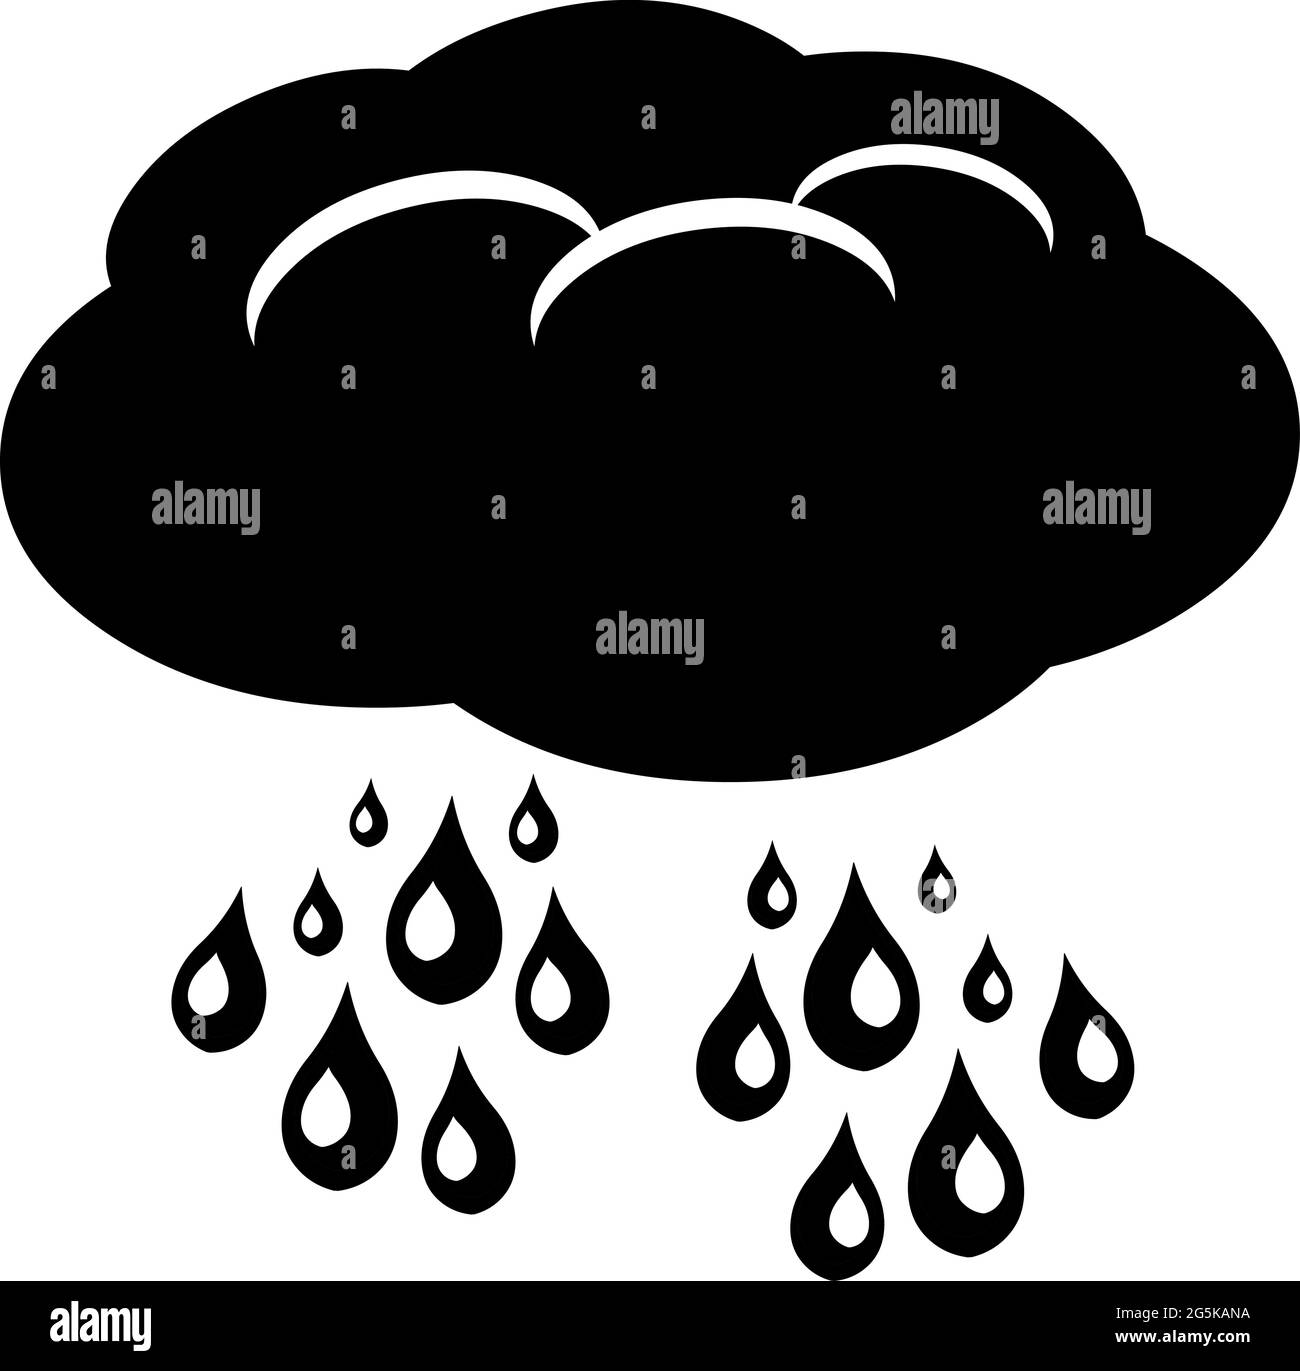 Vector illustration of icon or symbol of a cloud with raindrops Stock Vector